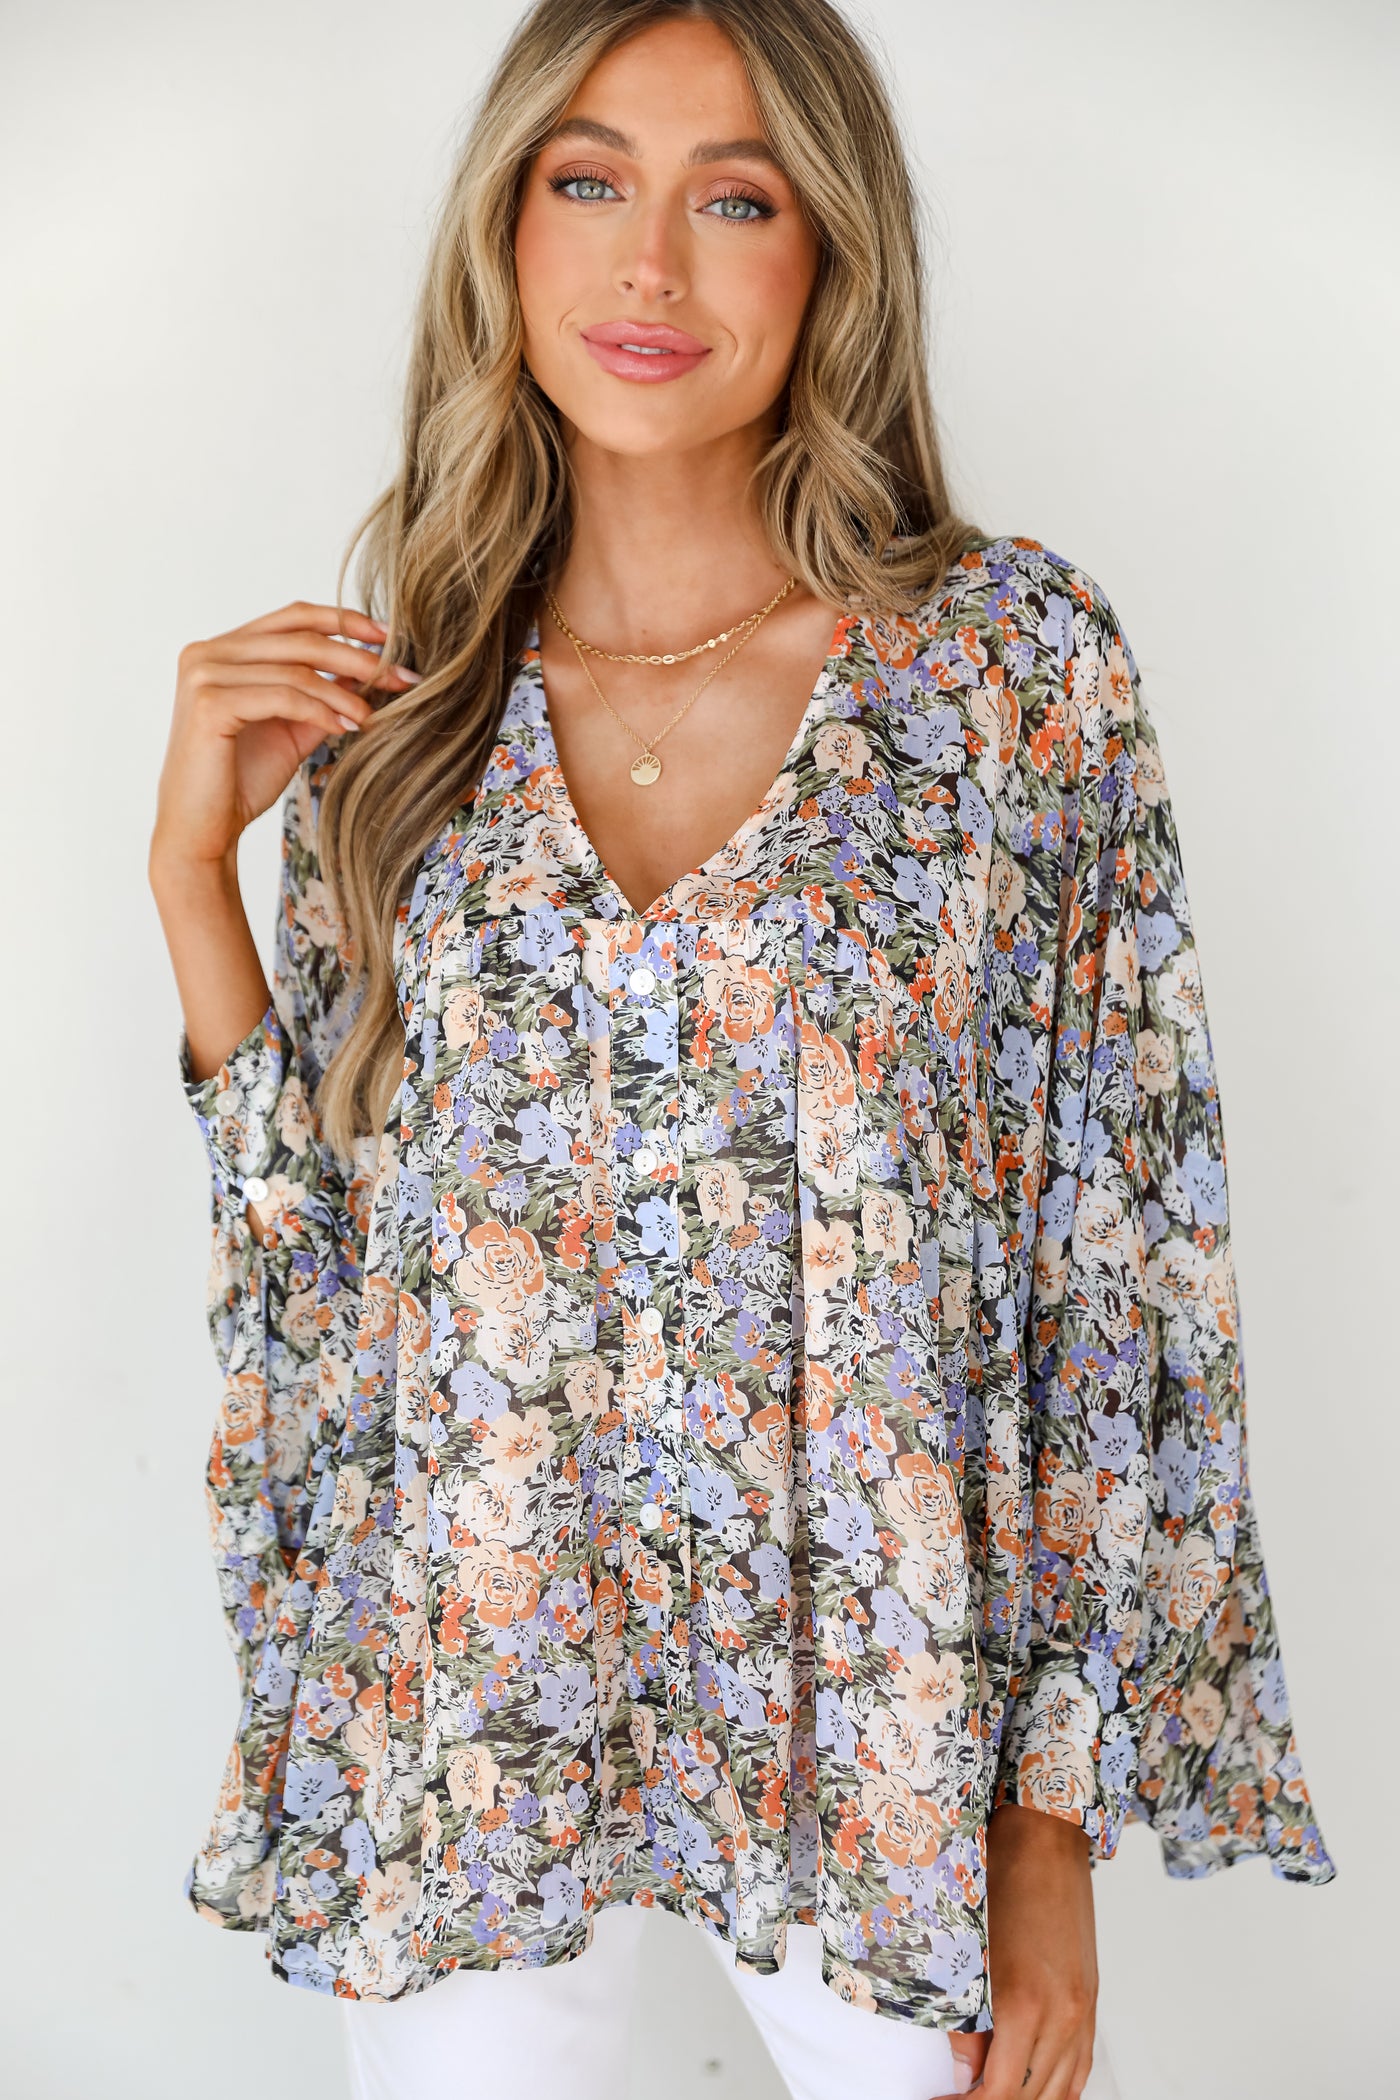 model wearing a Floral Blouse